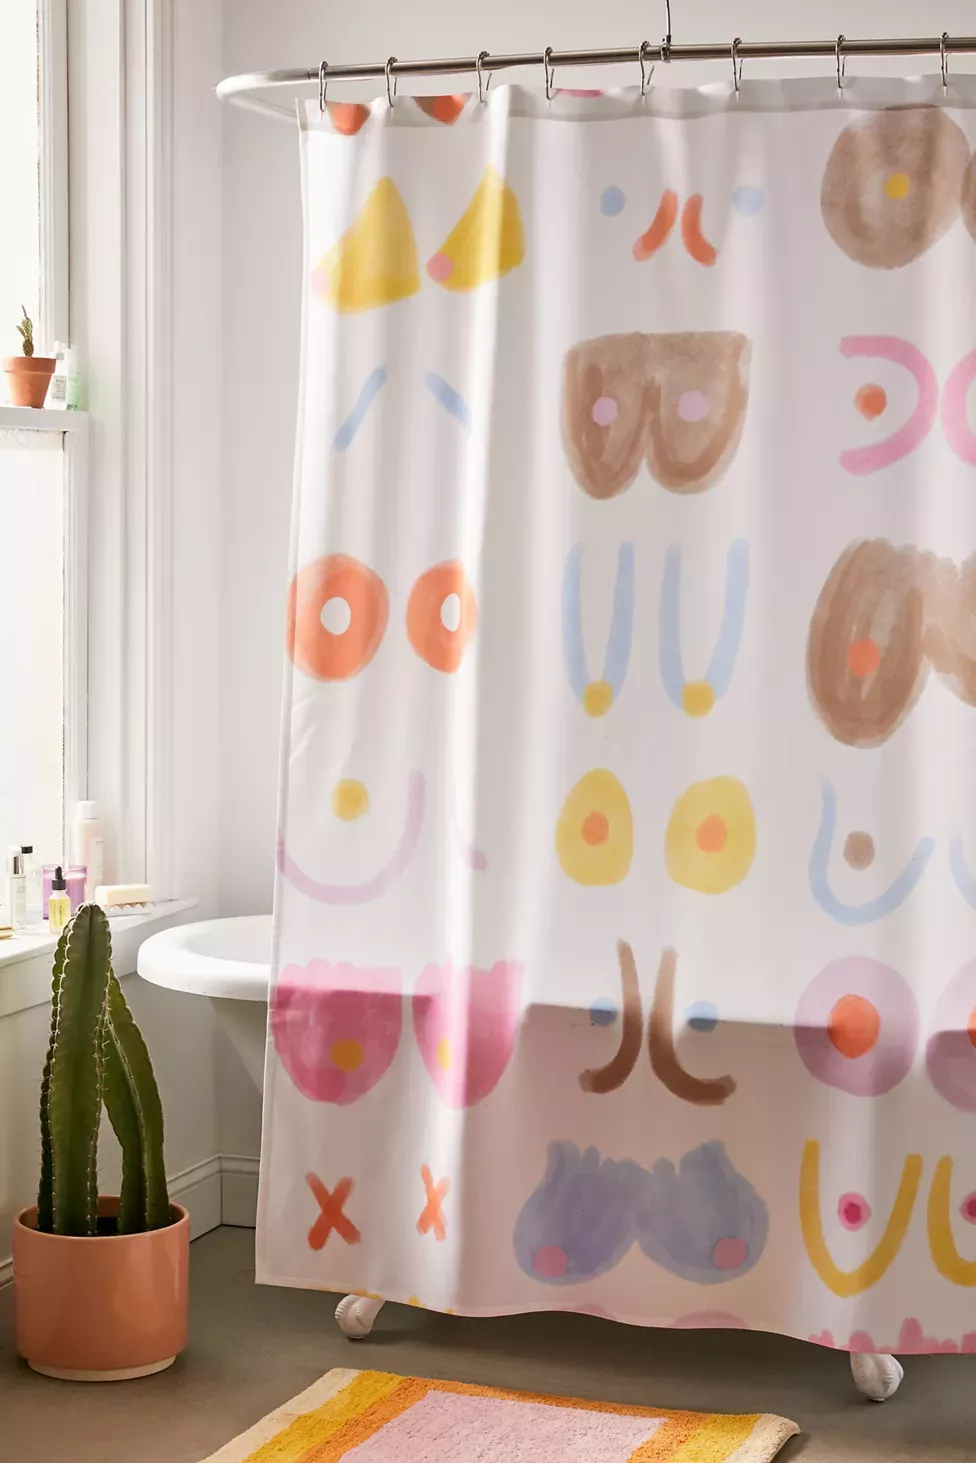 Shower Curtains: Adding Personality to Your Bathroom Decor